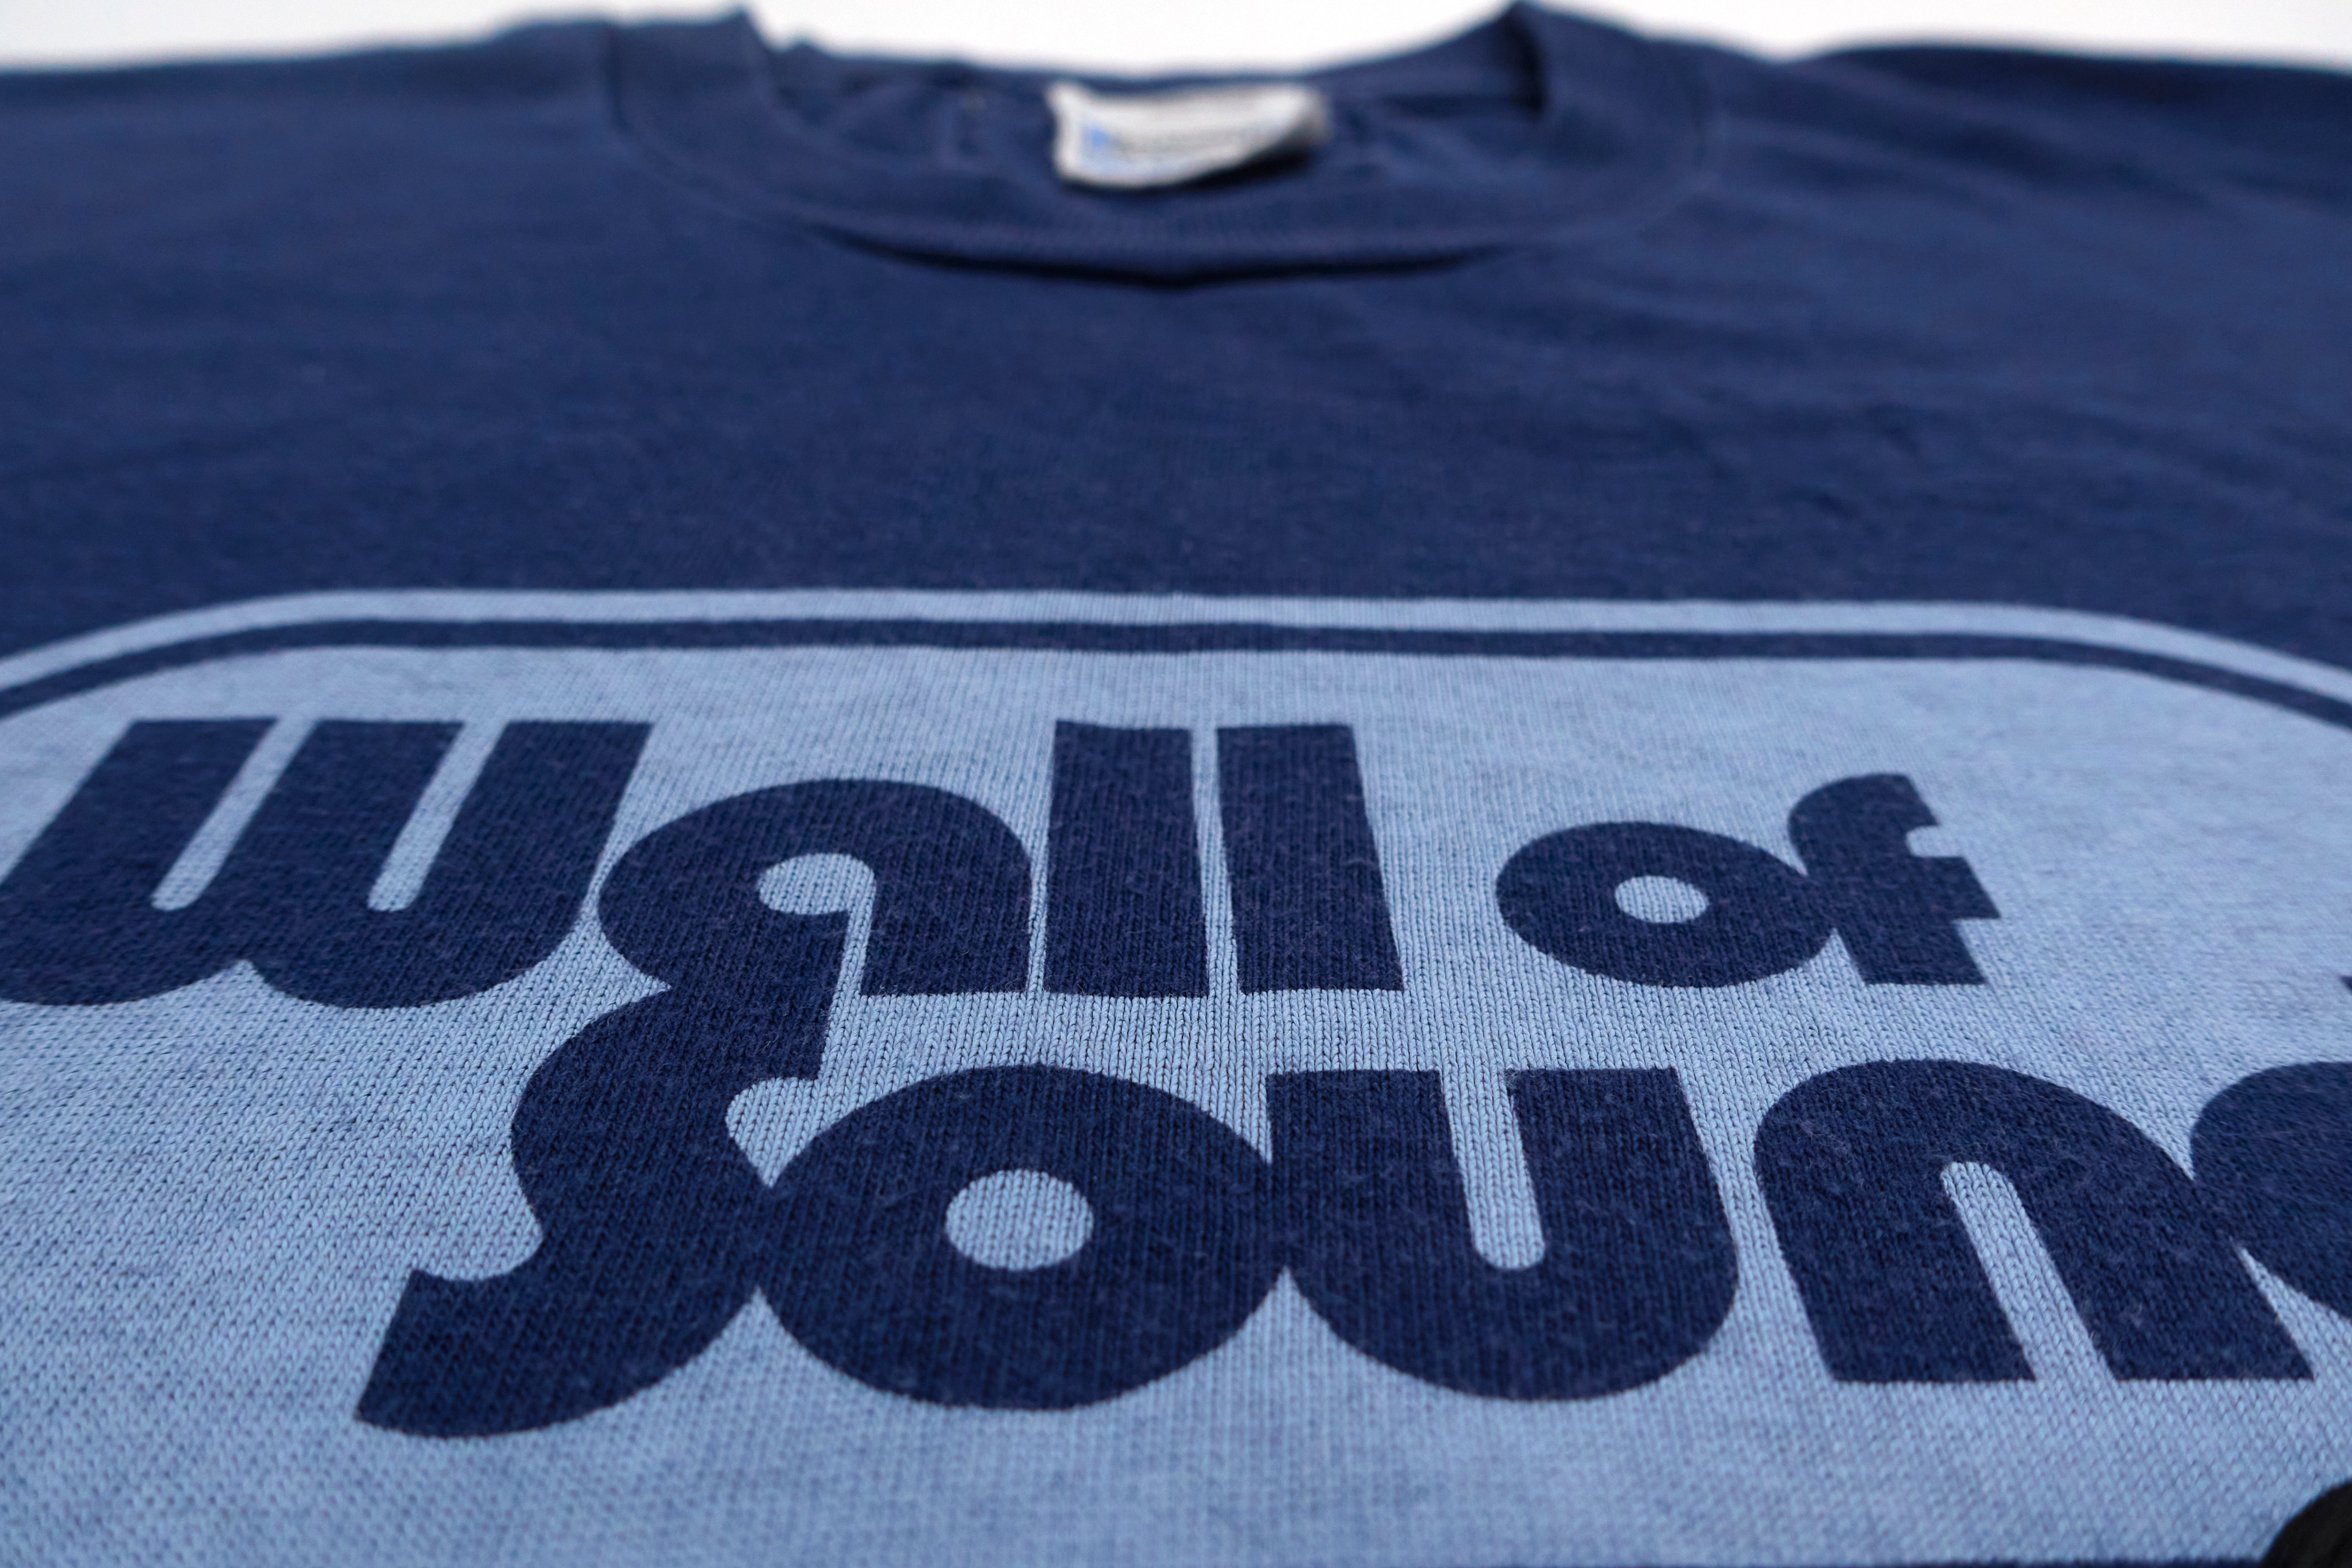 Wall Of Sound Records - Blue Logo Shirt Size Large